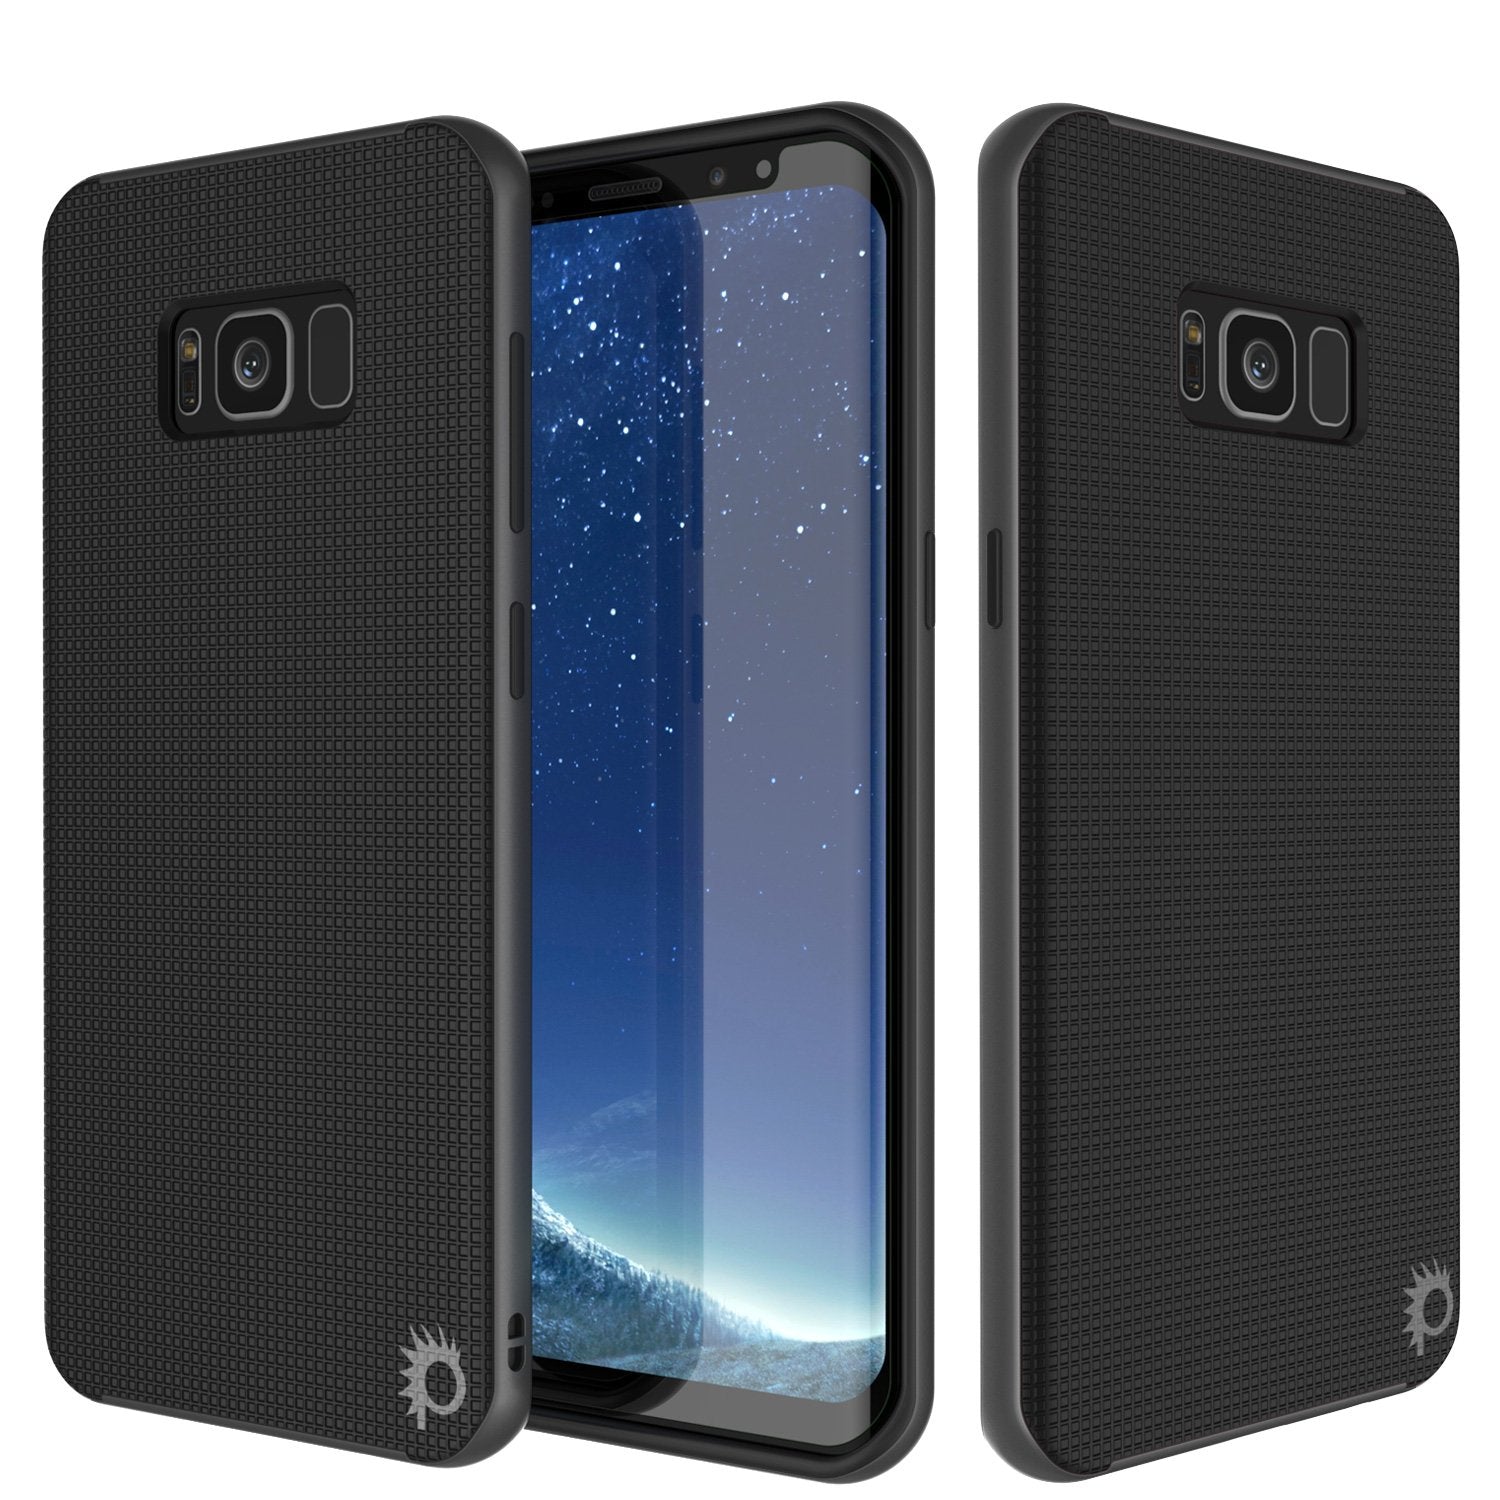 Galaxy S8 Case, PunkCase [Stealth Series] Hybrid 3-Piece Shockproof Dual Layer Cover [Non-Slip] [Soft TPU + PC Bumper] with PUNKSHIELD Screen Protector for Samsung S8 Edge [Grey]